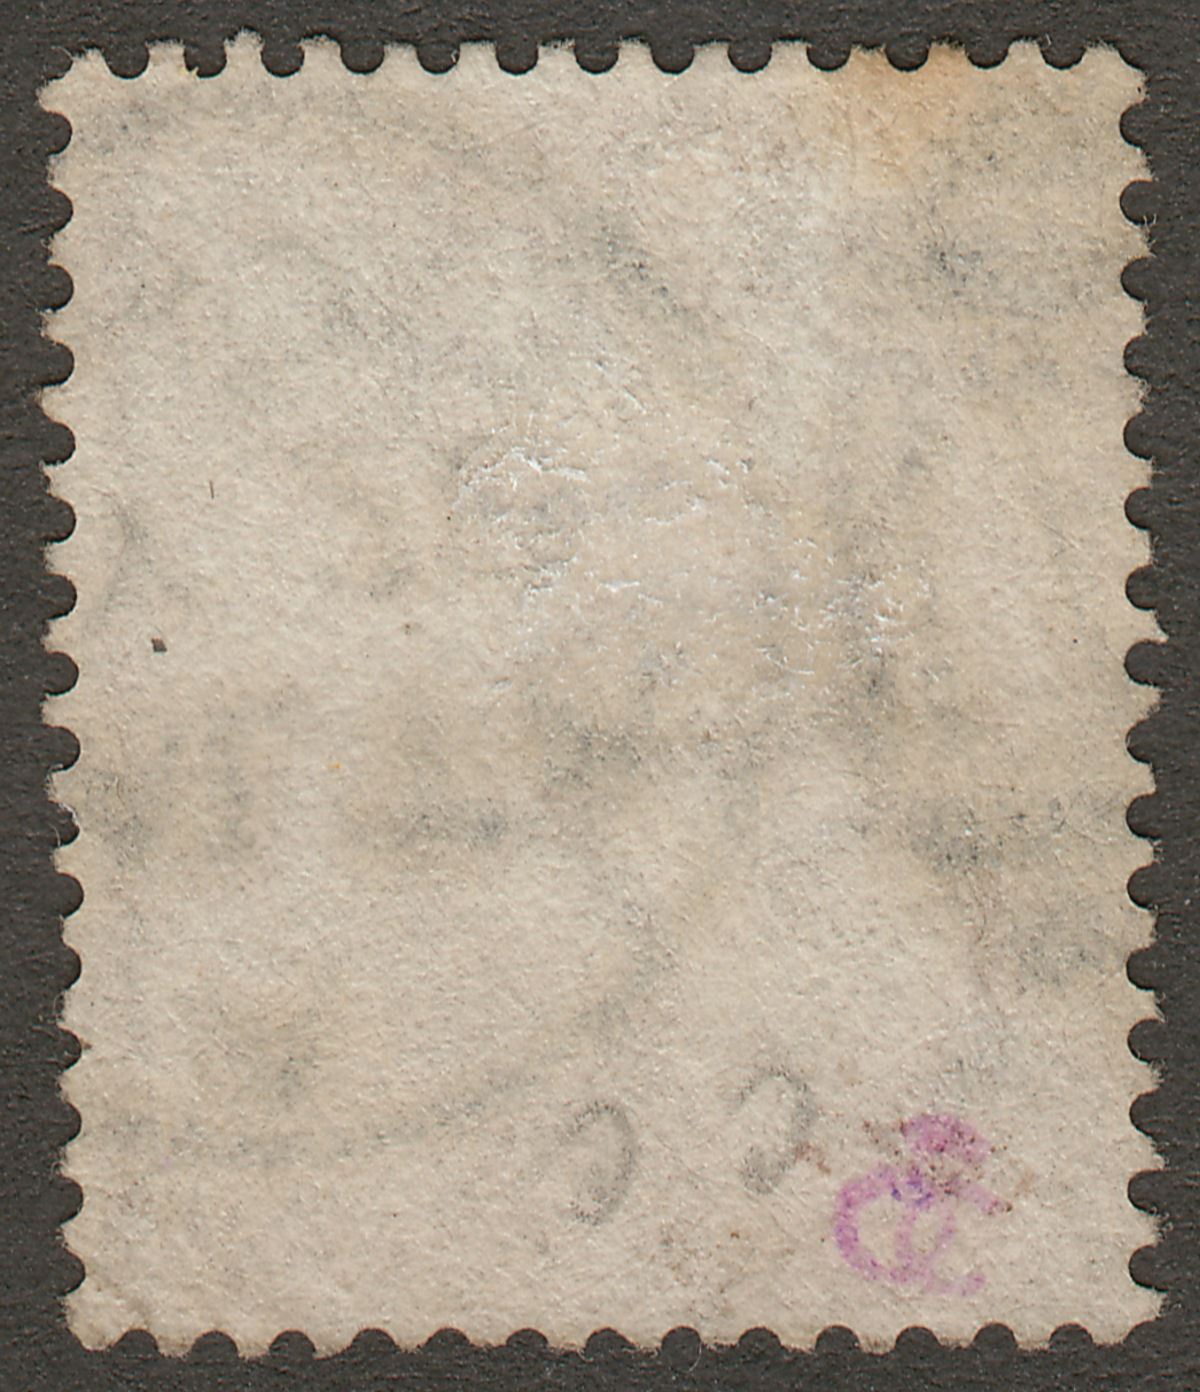 Malta 1880 Queen Victoria ½d Bright Orange-Yellow? p14 Used with CDS Postmark